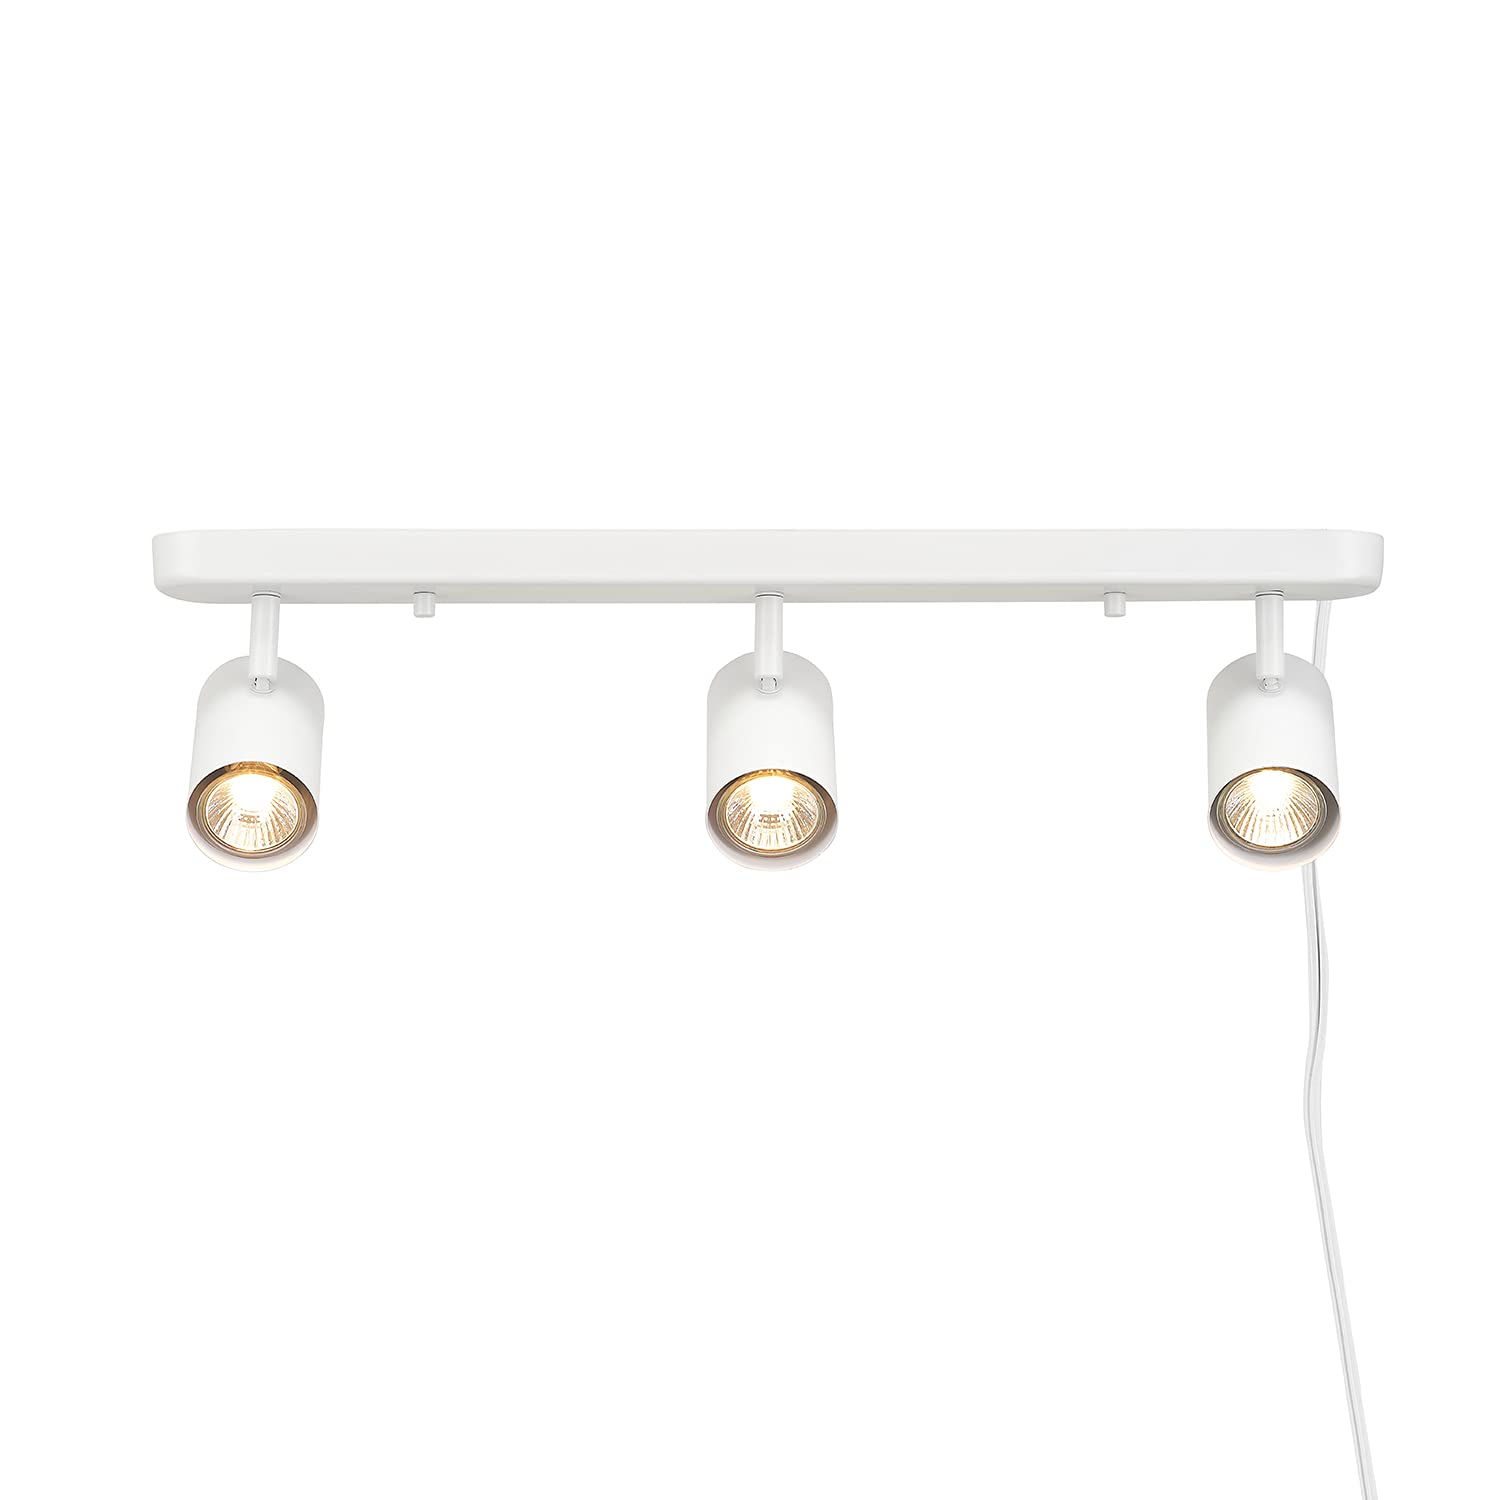 Globe Electric 60024 3-Light Plug-in Track Lighting, Matte White, 15 Foot Cord, in-Line On/Off Rocker Switch, Track Ceiling Light, Track Lighting Kit, Ceiling Light Fixture, Home Improvement